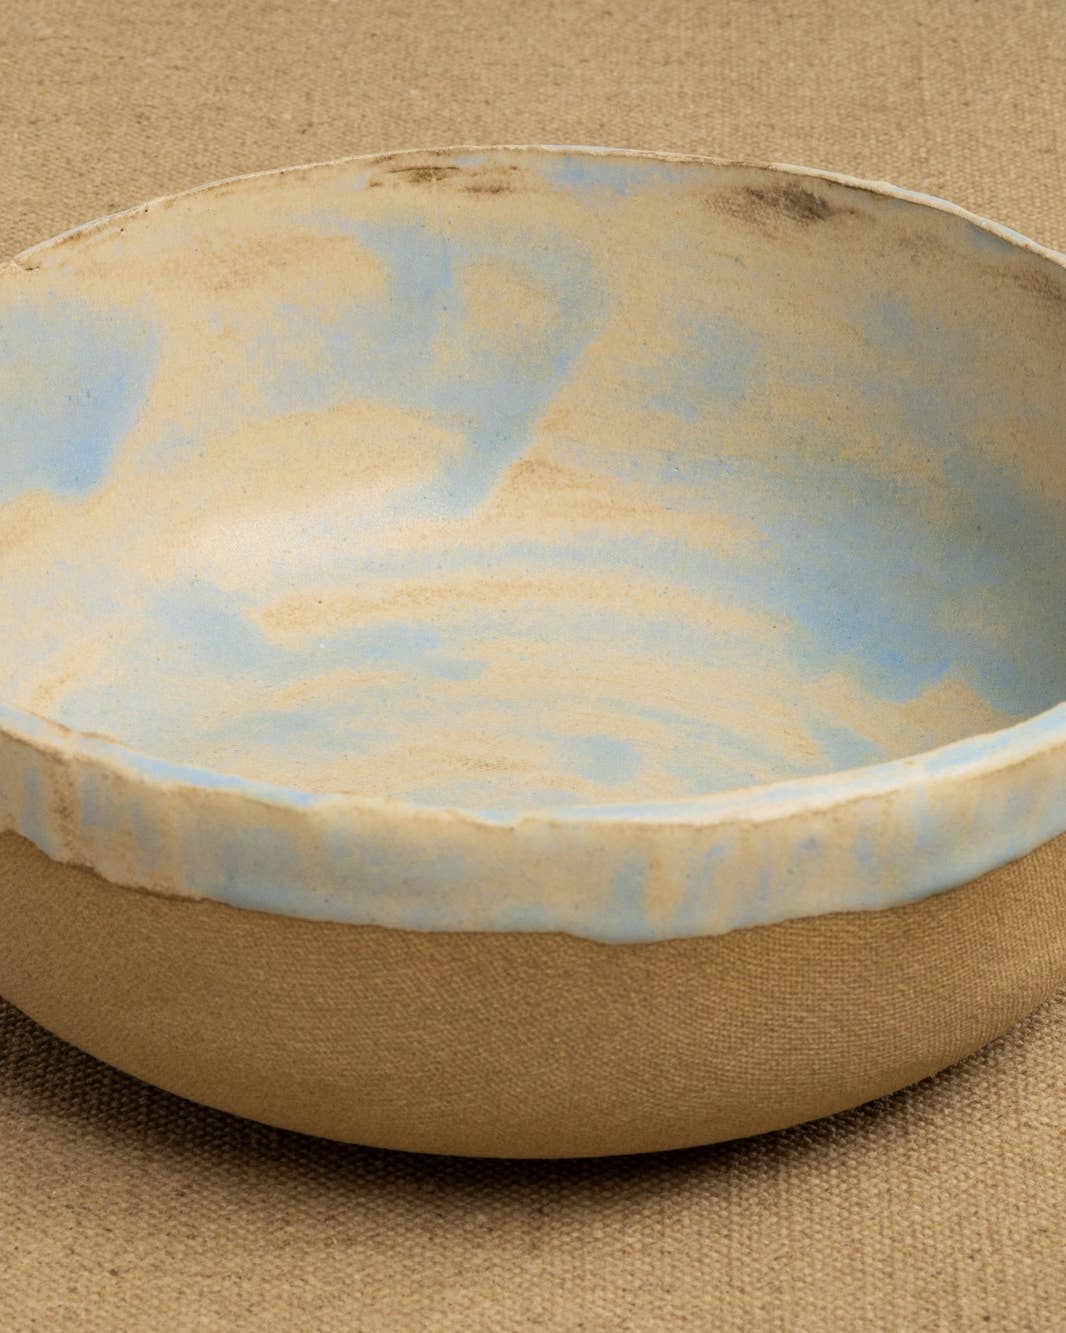 Large bowl from women parolees Peoples Pottery Project